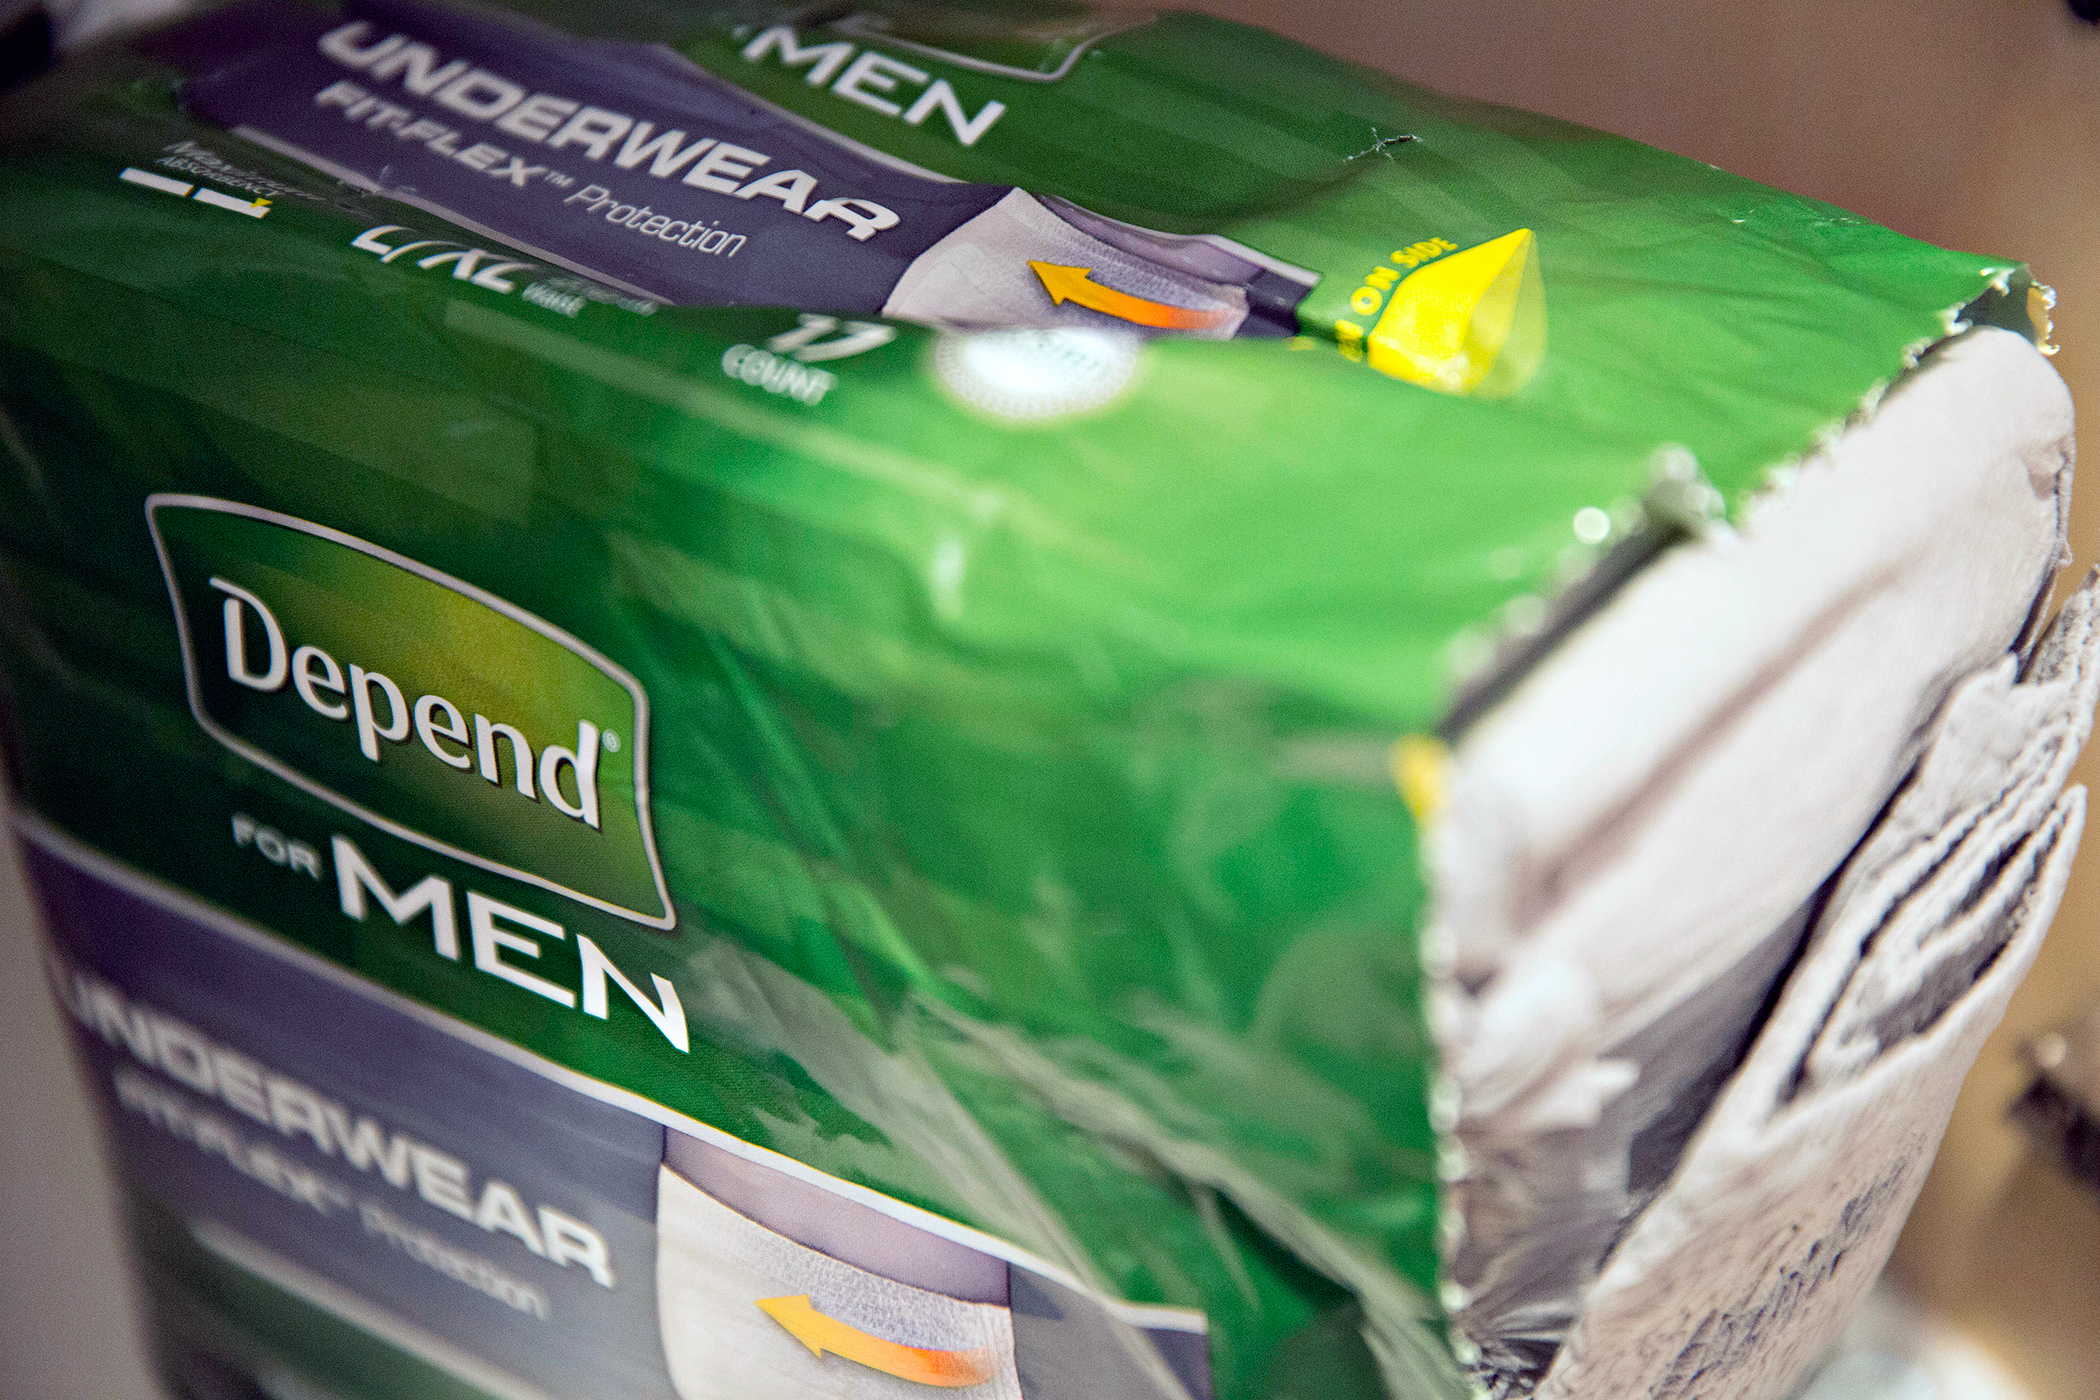 Kimberly-Clark Corp. Depend brand adult diapers are arranged for a photograph in Tiskilwa, Illinois, U.S., on Friday, Oct. 16, 2015. Kimberly-Clark is scheduled to report earnings figures on October 21.